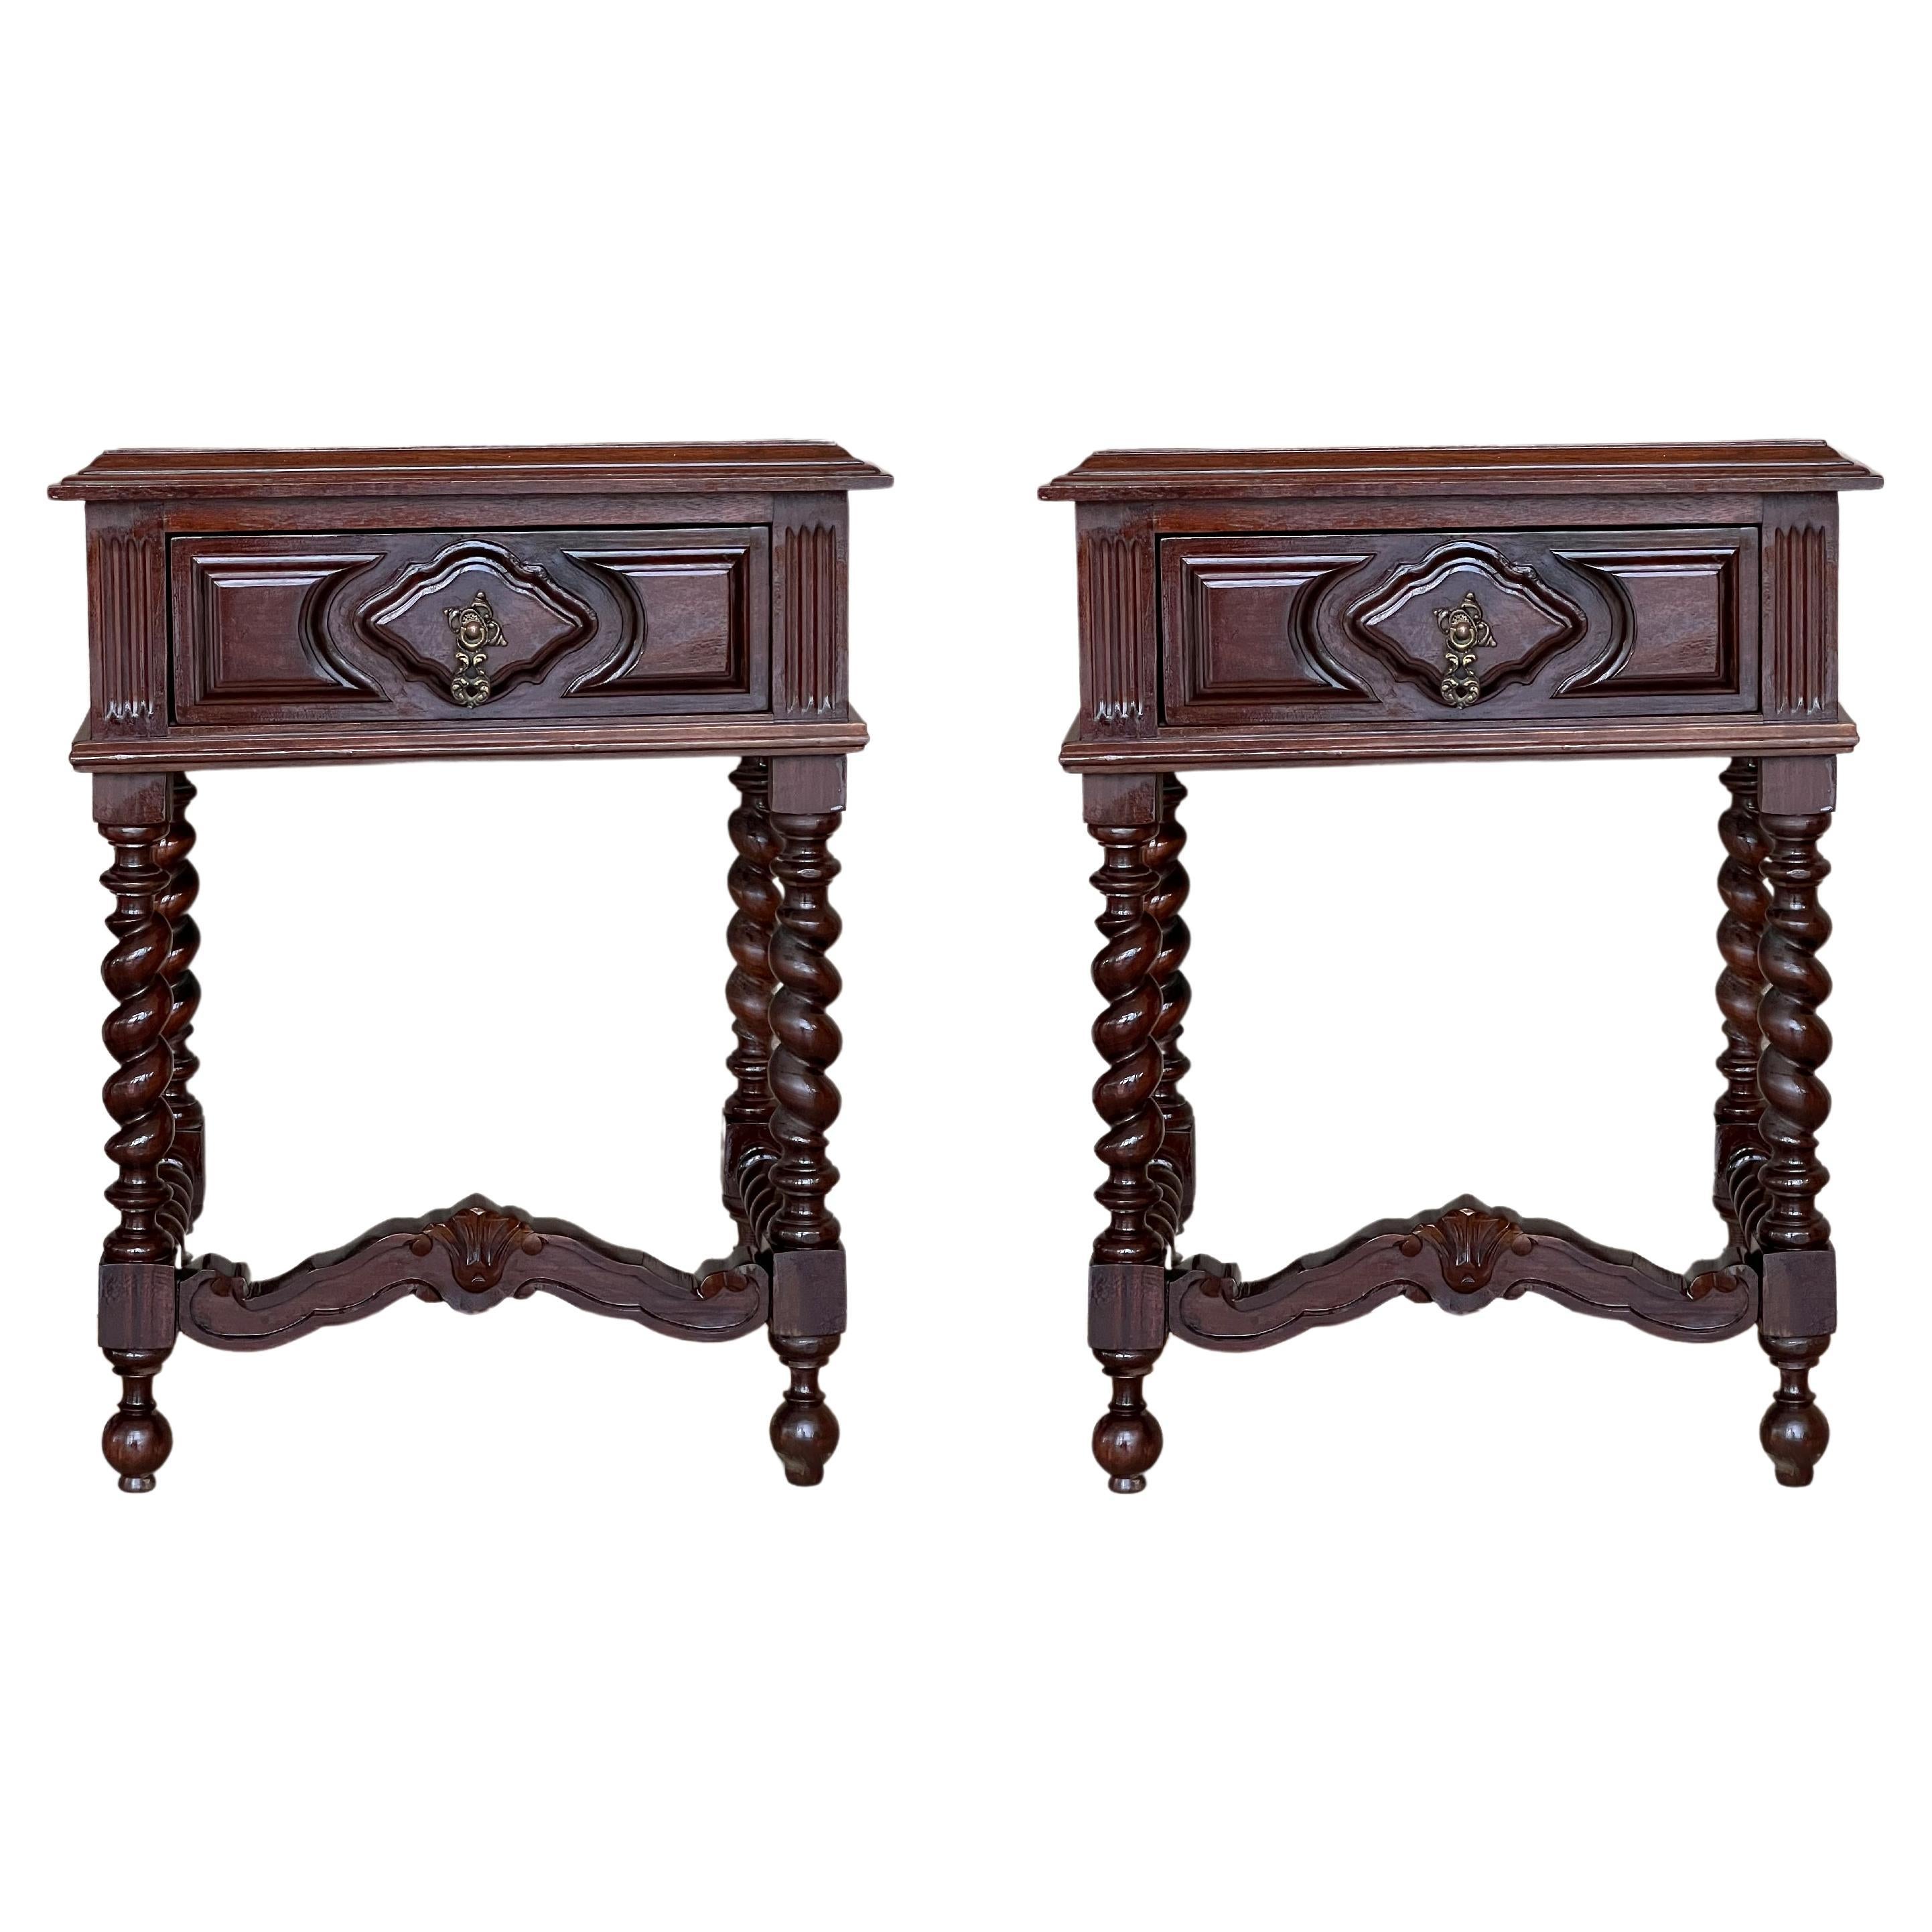 20th Century Pair of Solid Carved French Nightstands with Solomonic Columns